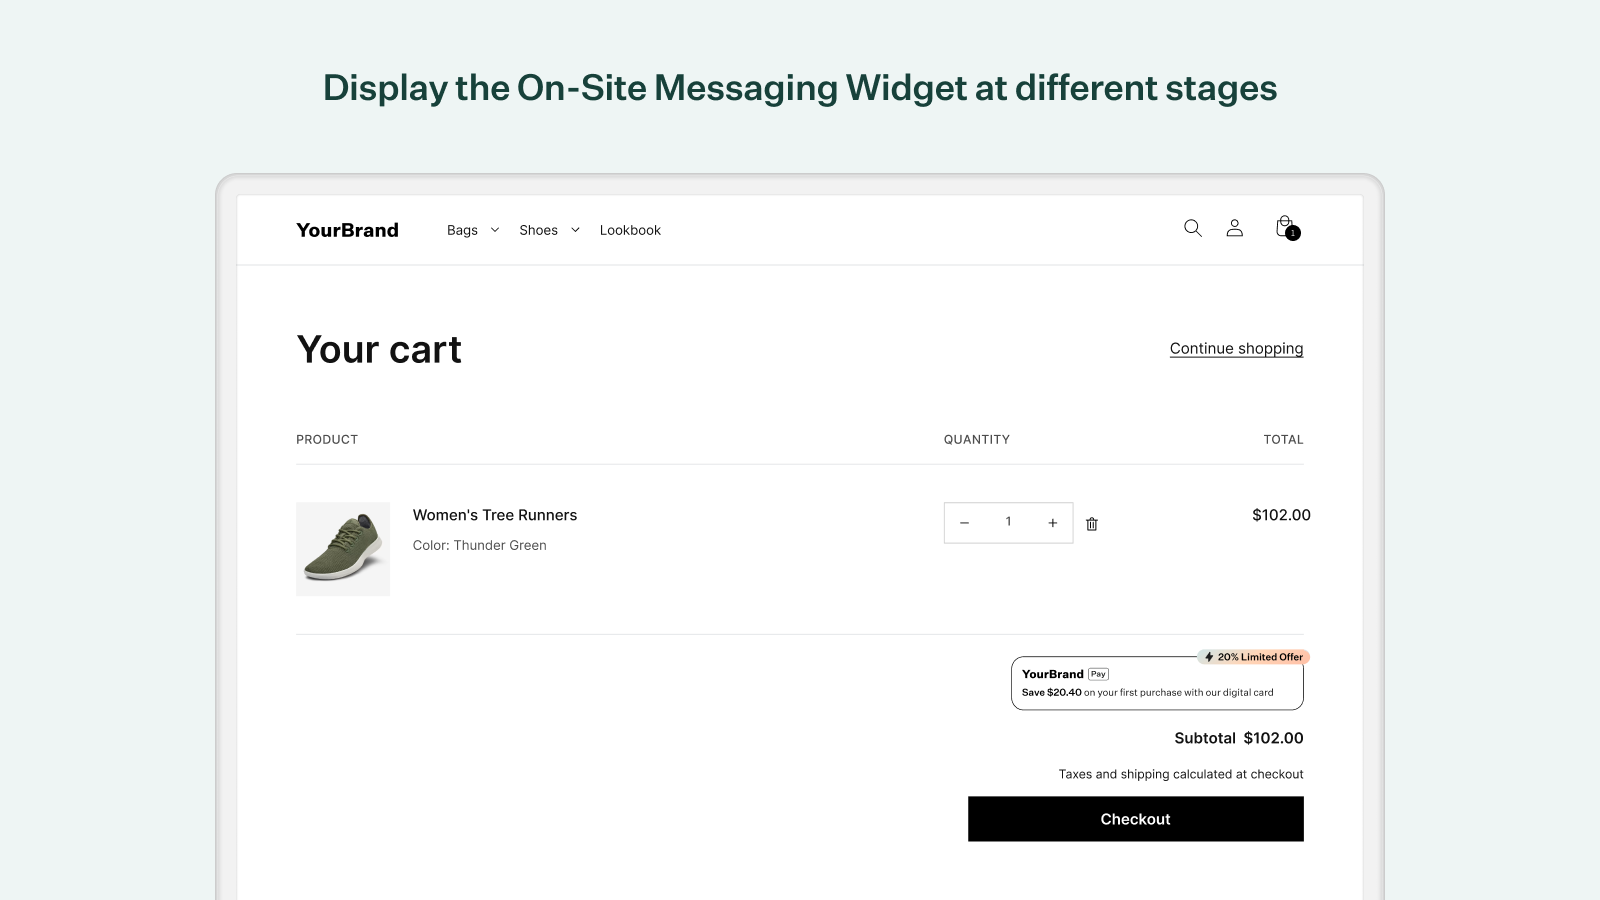 Display On-Site Messaging at different stages